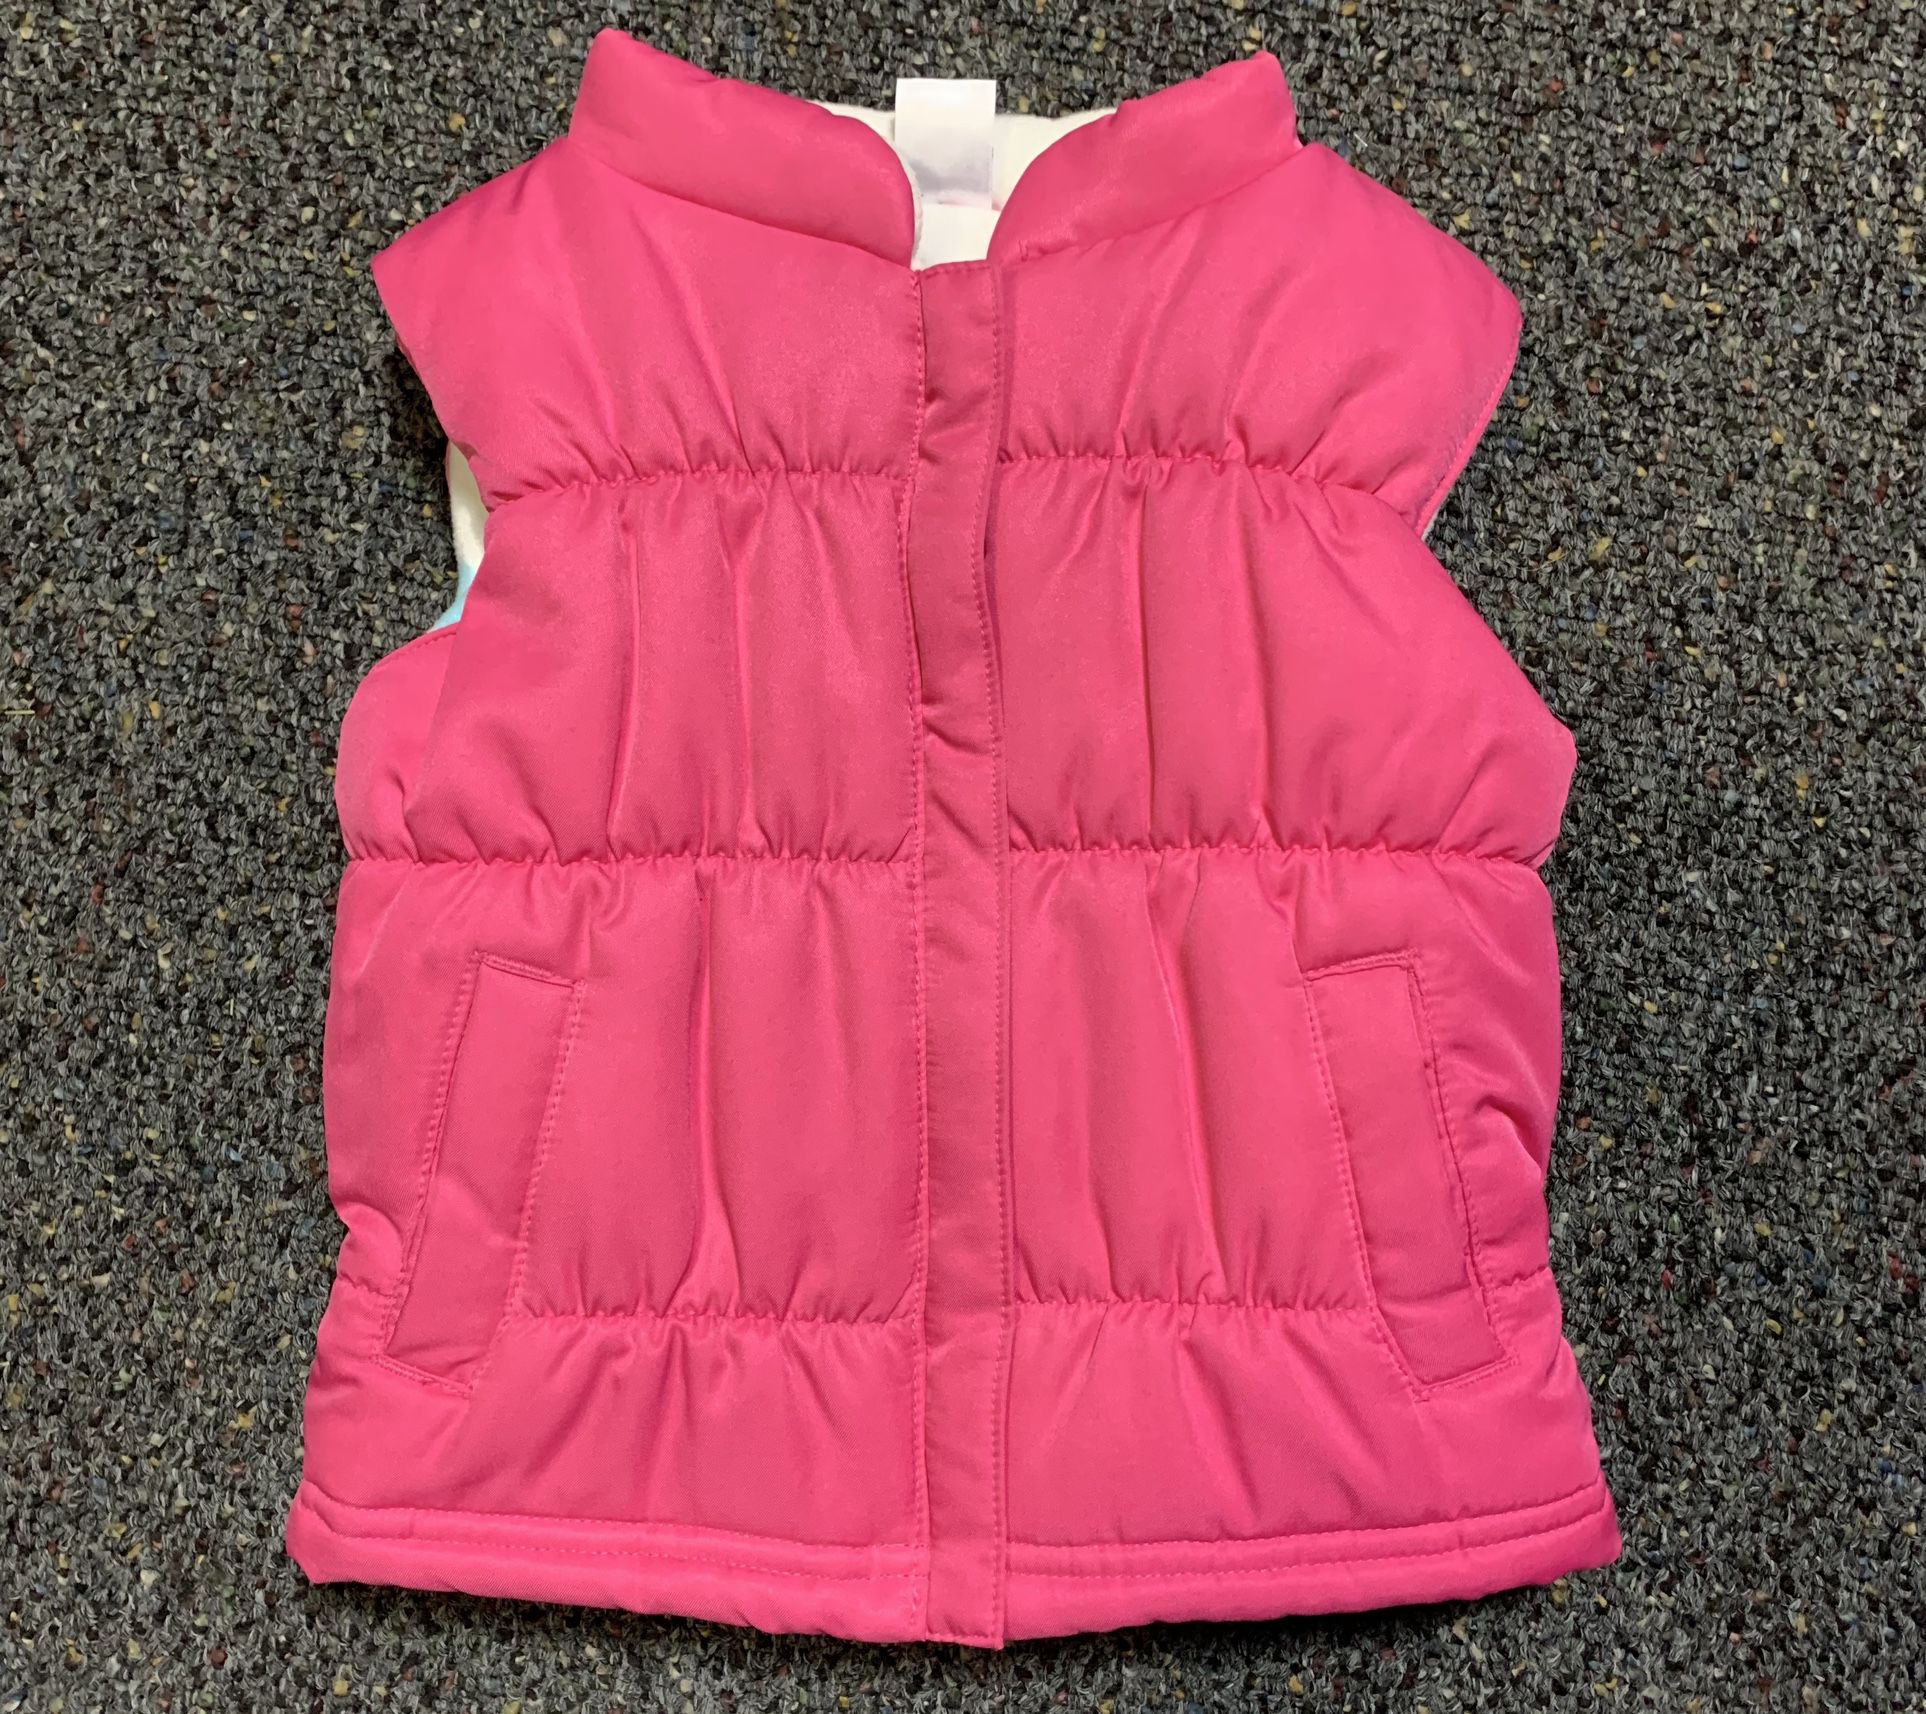 Carters Toddler girl size 12 month pink fleece lined puffer vest